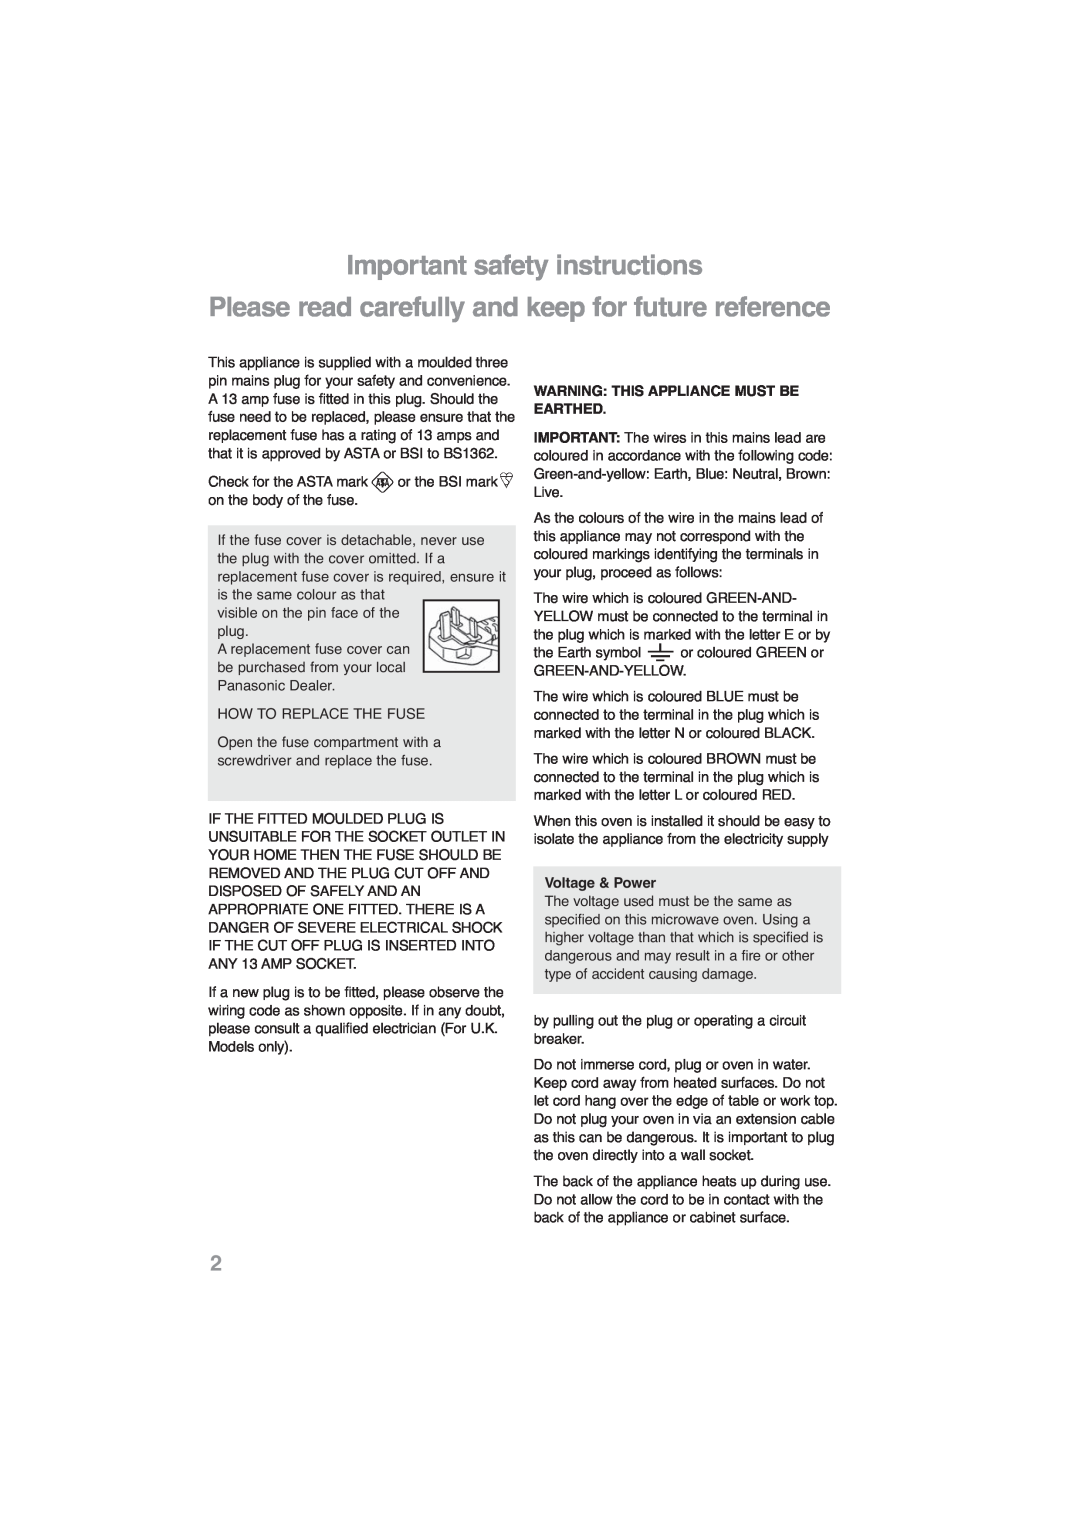 Panasonic NN-CF768M, NN-CF778S Important safety instructions, Warning: This Appliance Must Be Earthed, Voltage & Power 